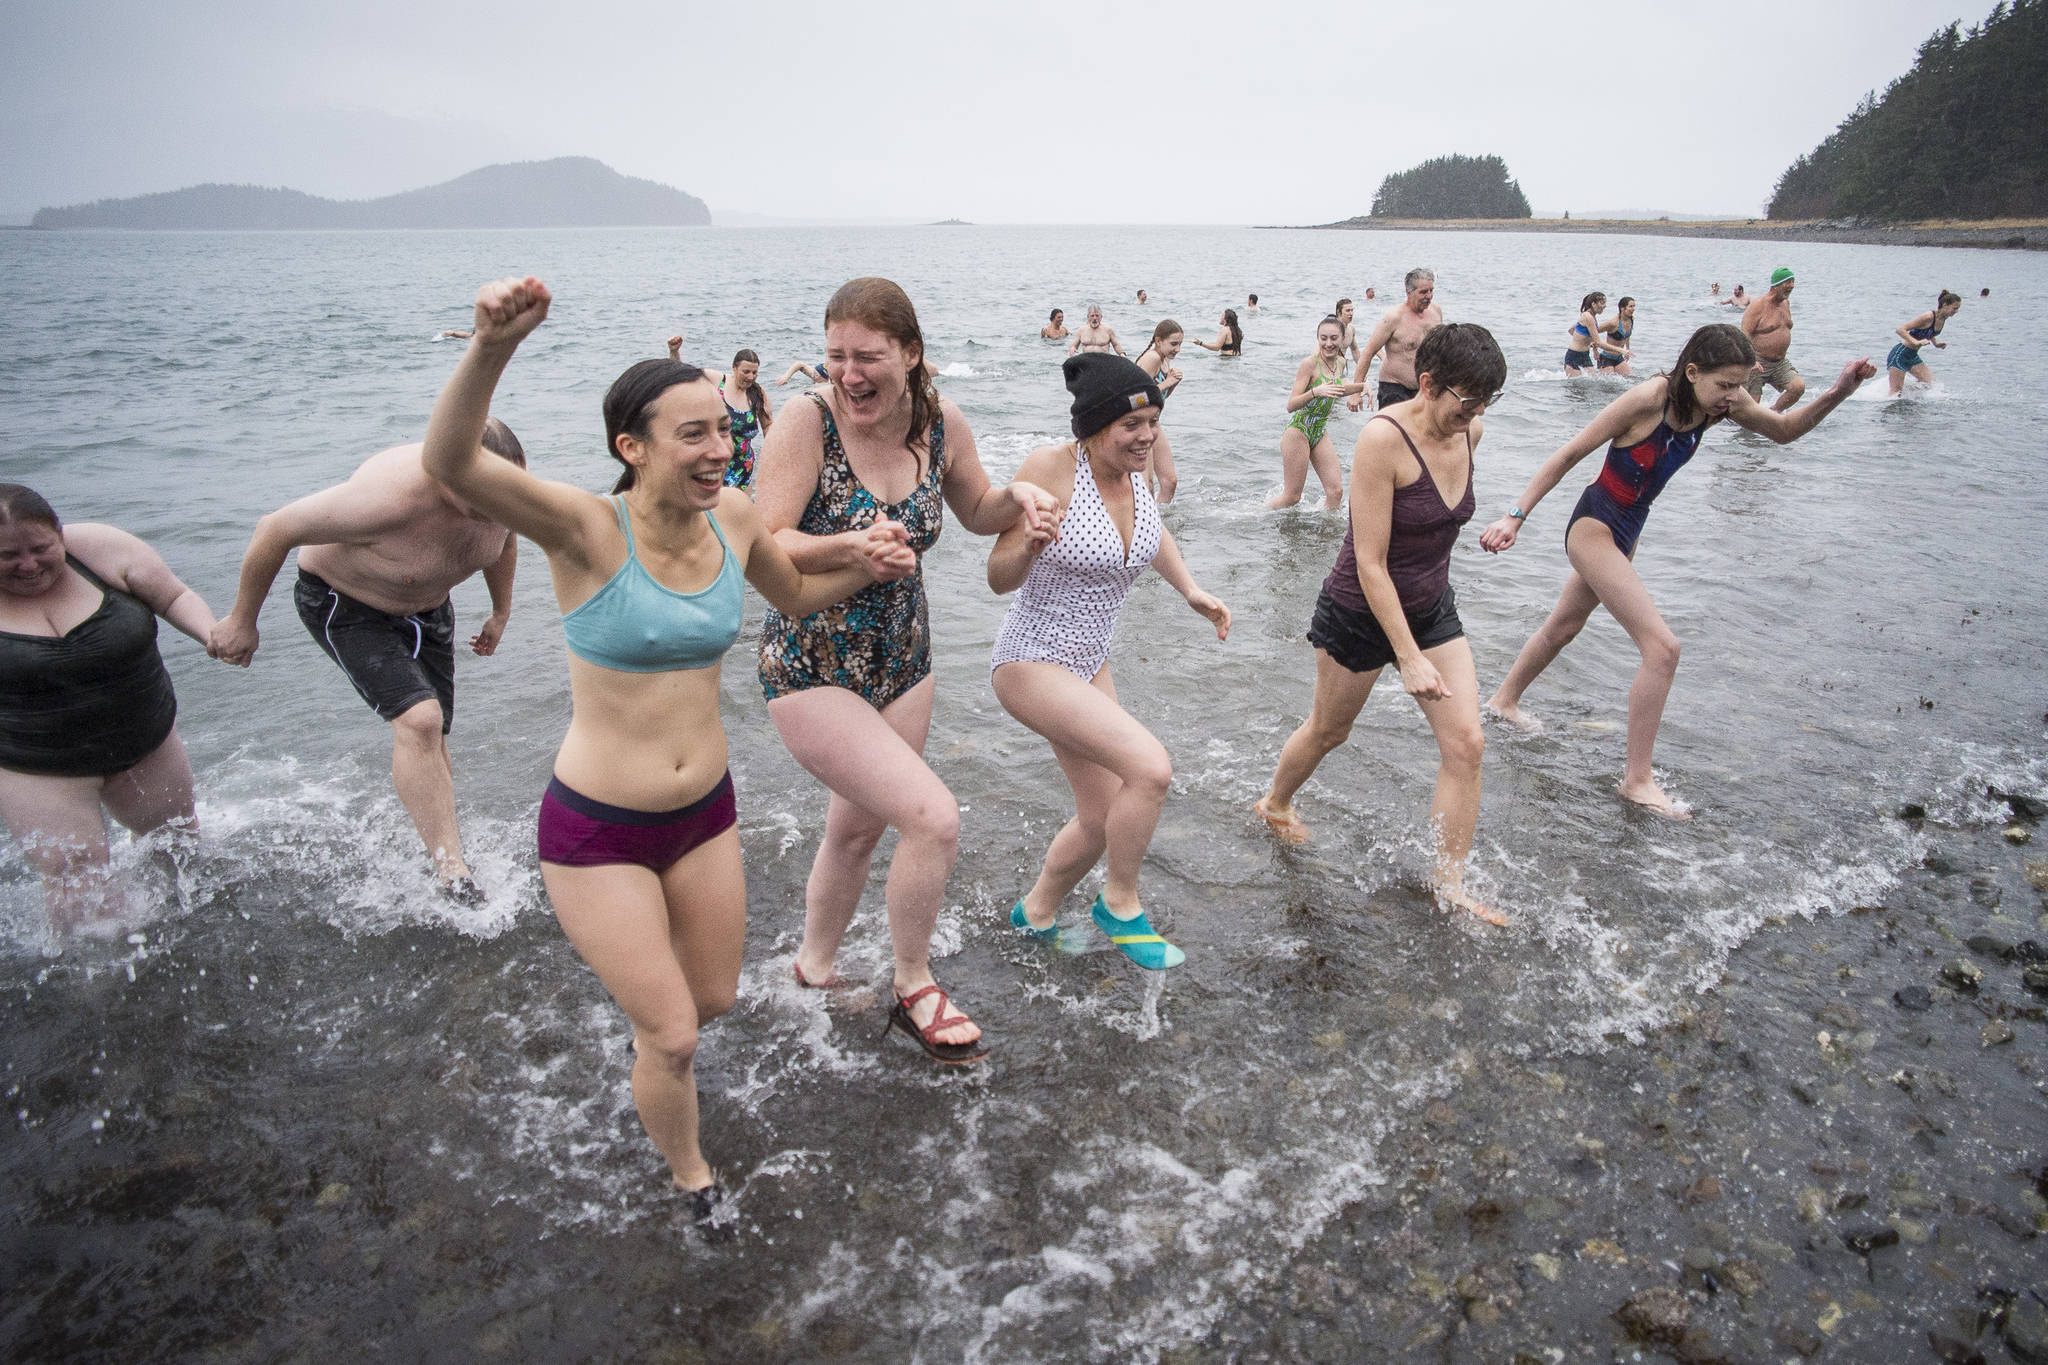 Juneau residents return from the frigid waters at Auke Bay Recreation Area for the annual Juneau Polar Bear Dip on Tuesday, Jan. 1, 2019. Nearly 200 people took the plunge to start off the new year. (Michael Penn | Juneau Empire)